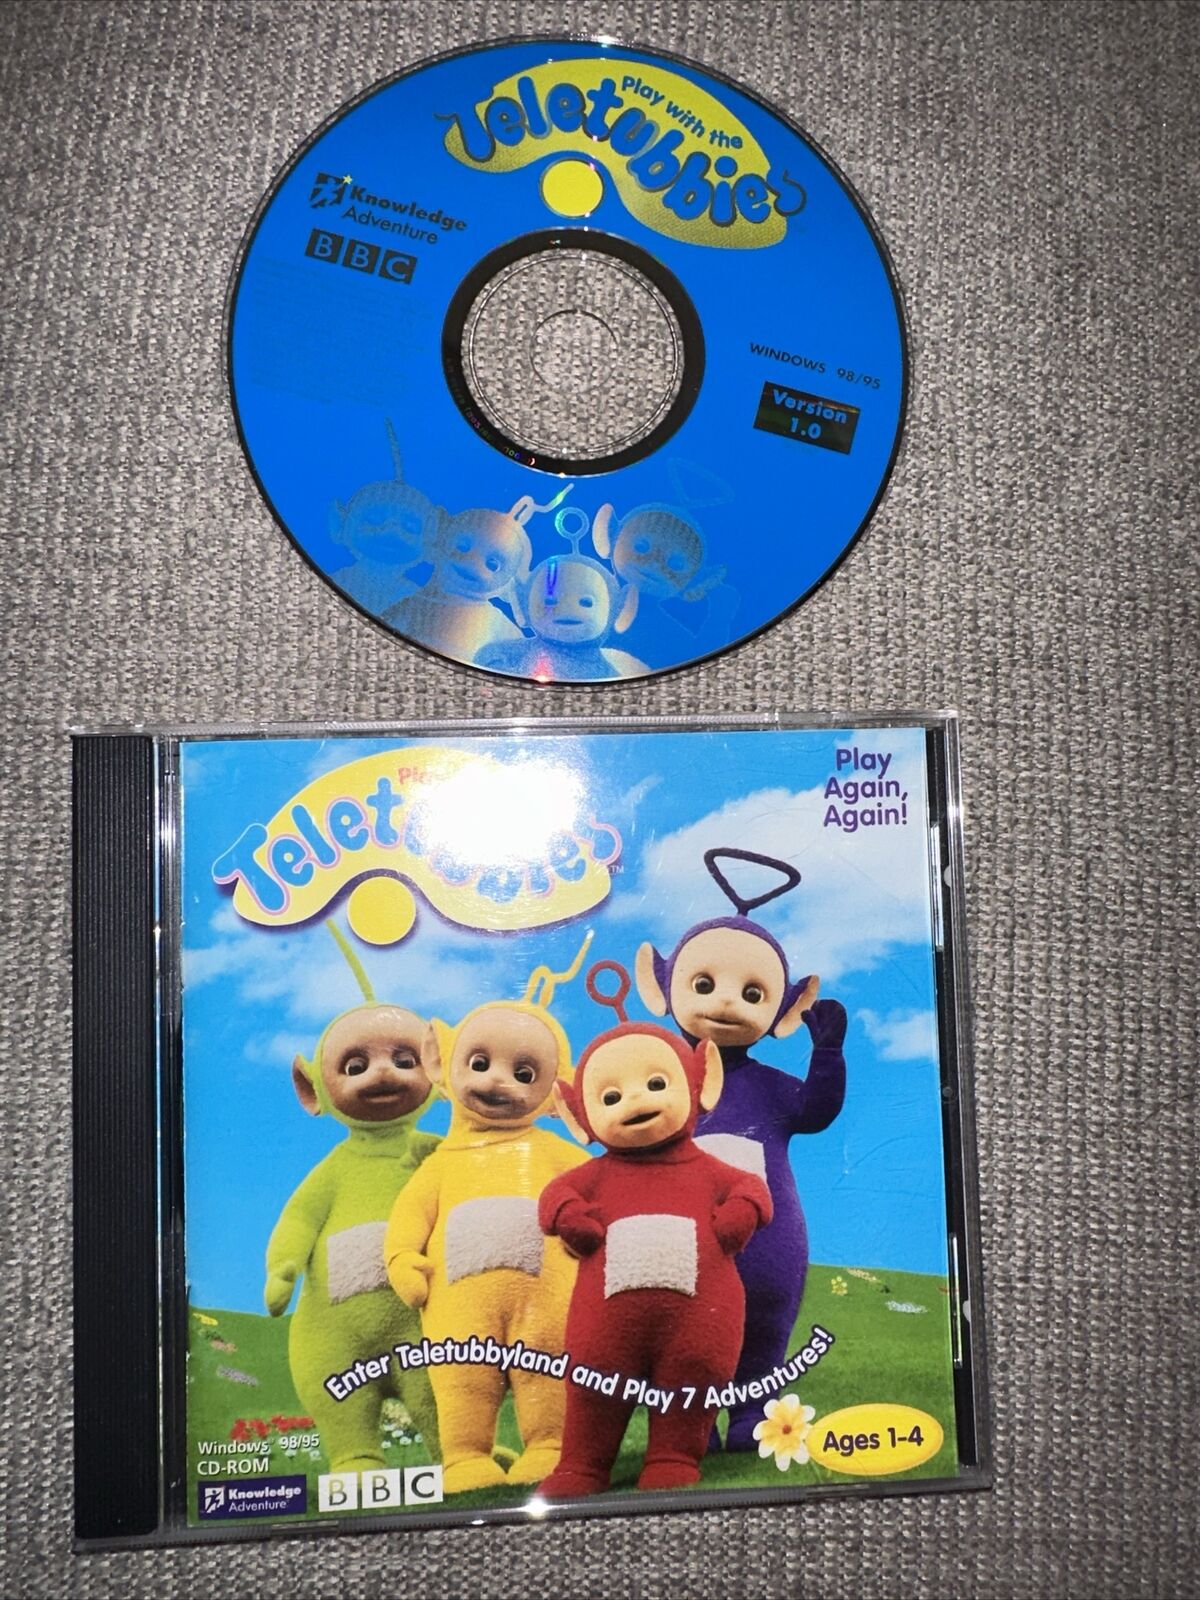 PLAY WITH THE TELETUBBIES BBC Vintage Software Game Windows PC CD-ROM Disc 1998